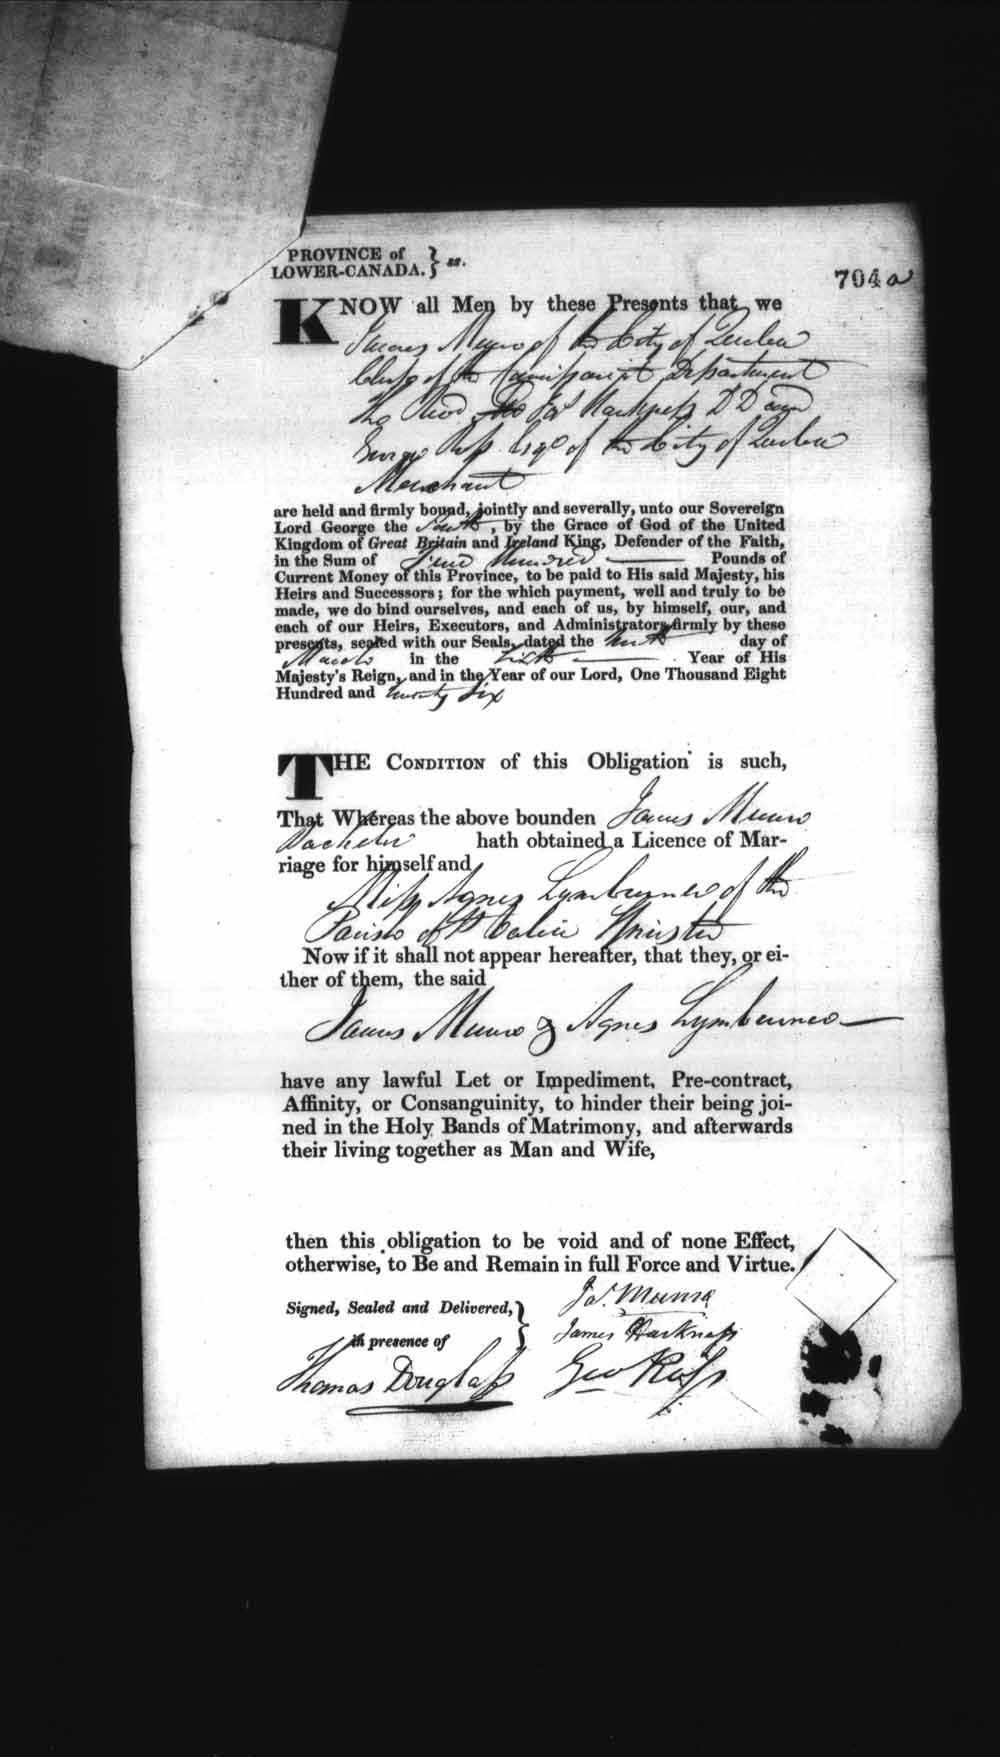 Digitized page of Upper and Lower Canada Marriage Bonds (1779-1865) for Image No.: e008236757